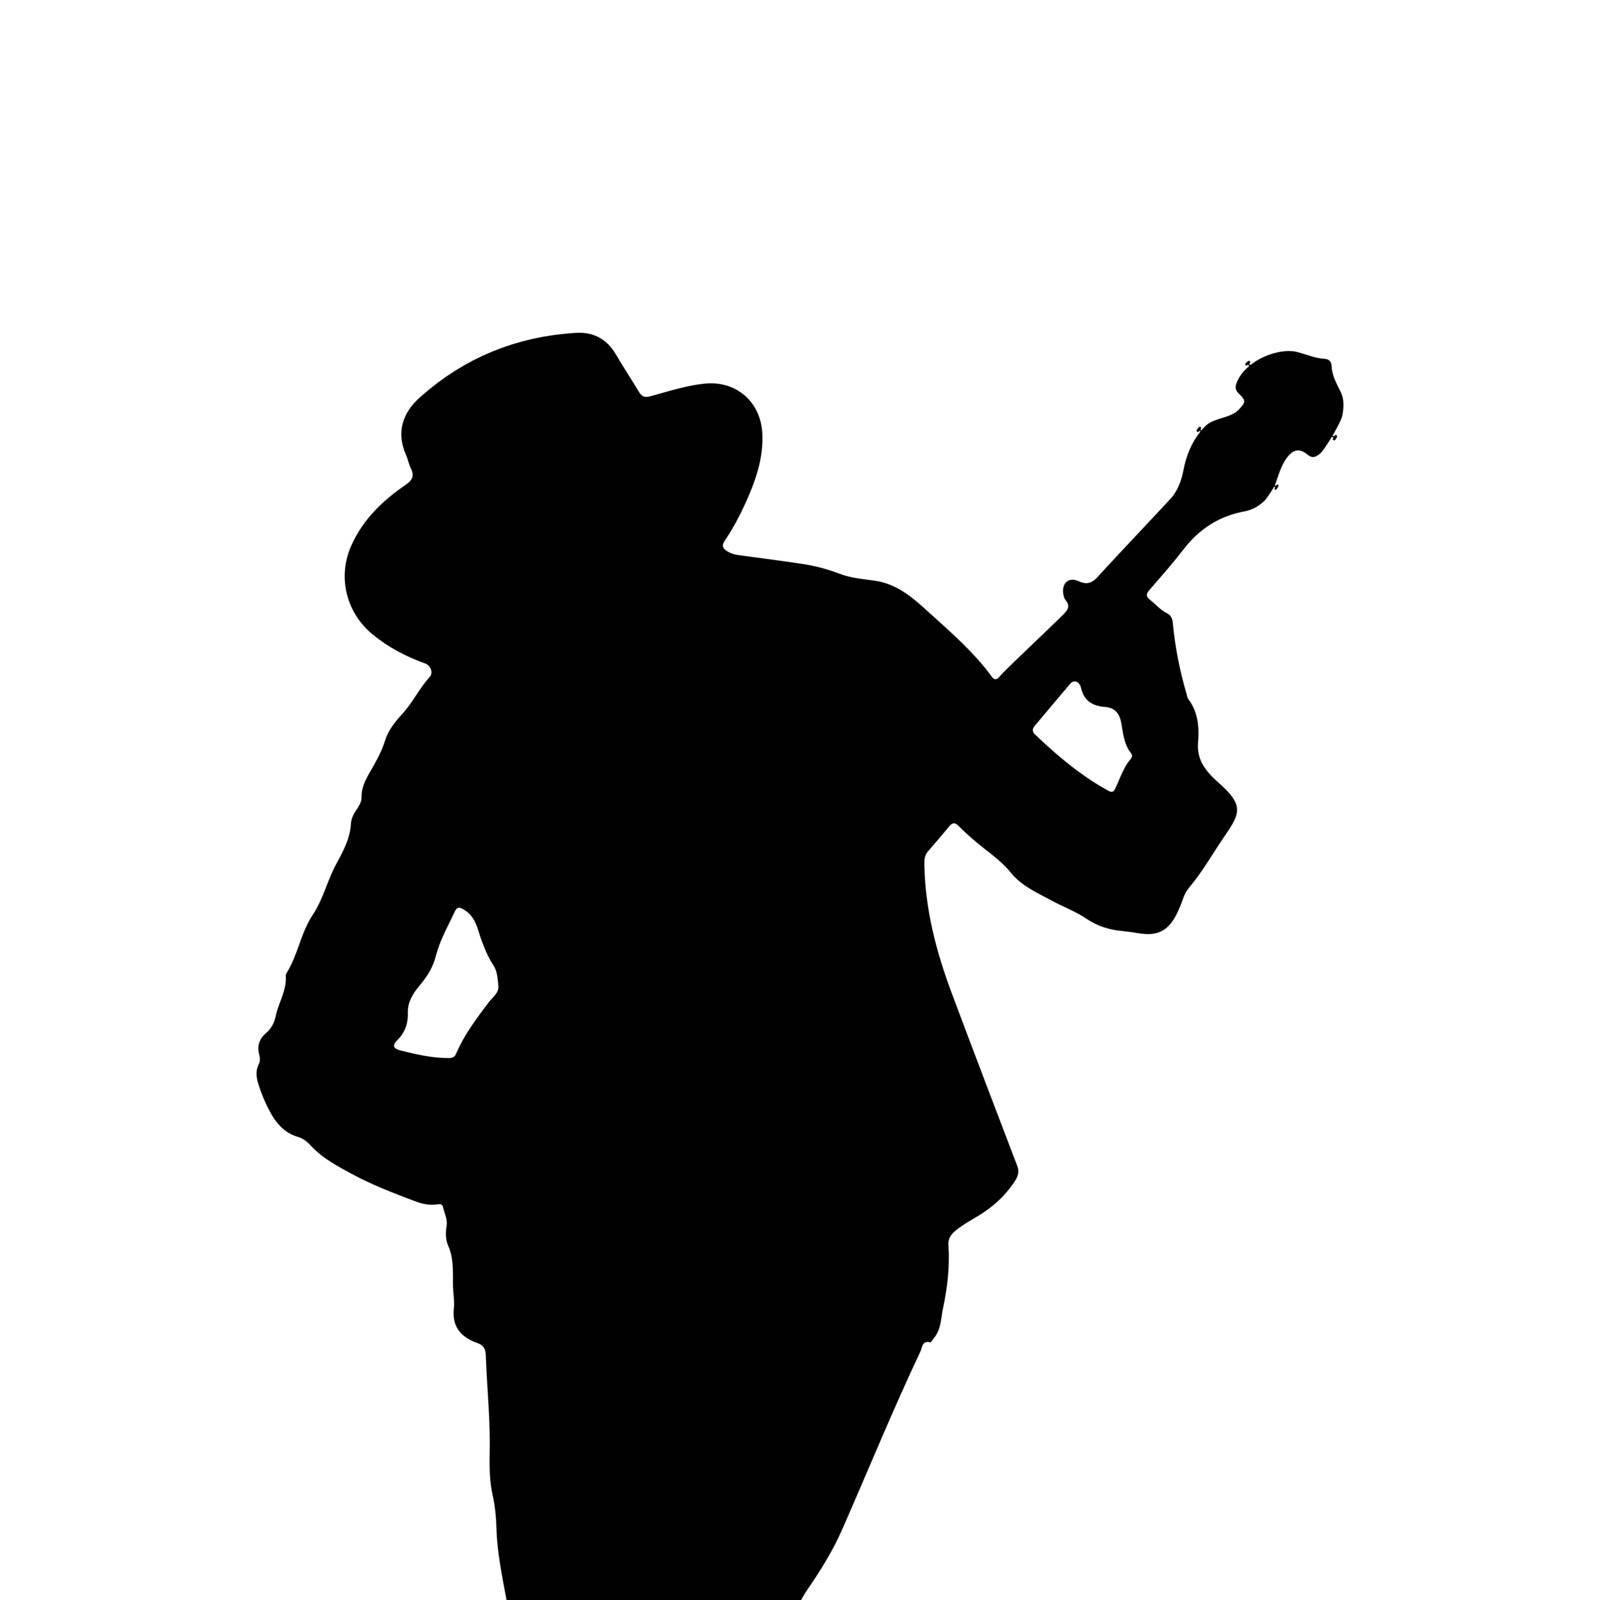 Silhouette of a man in a hat with a guitar. Simple design by Grommik